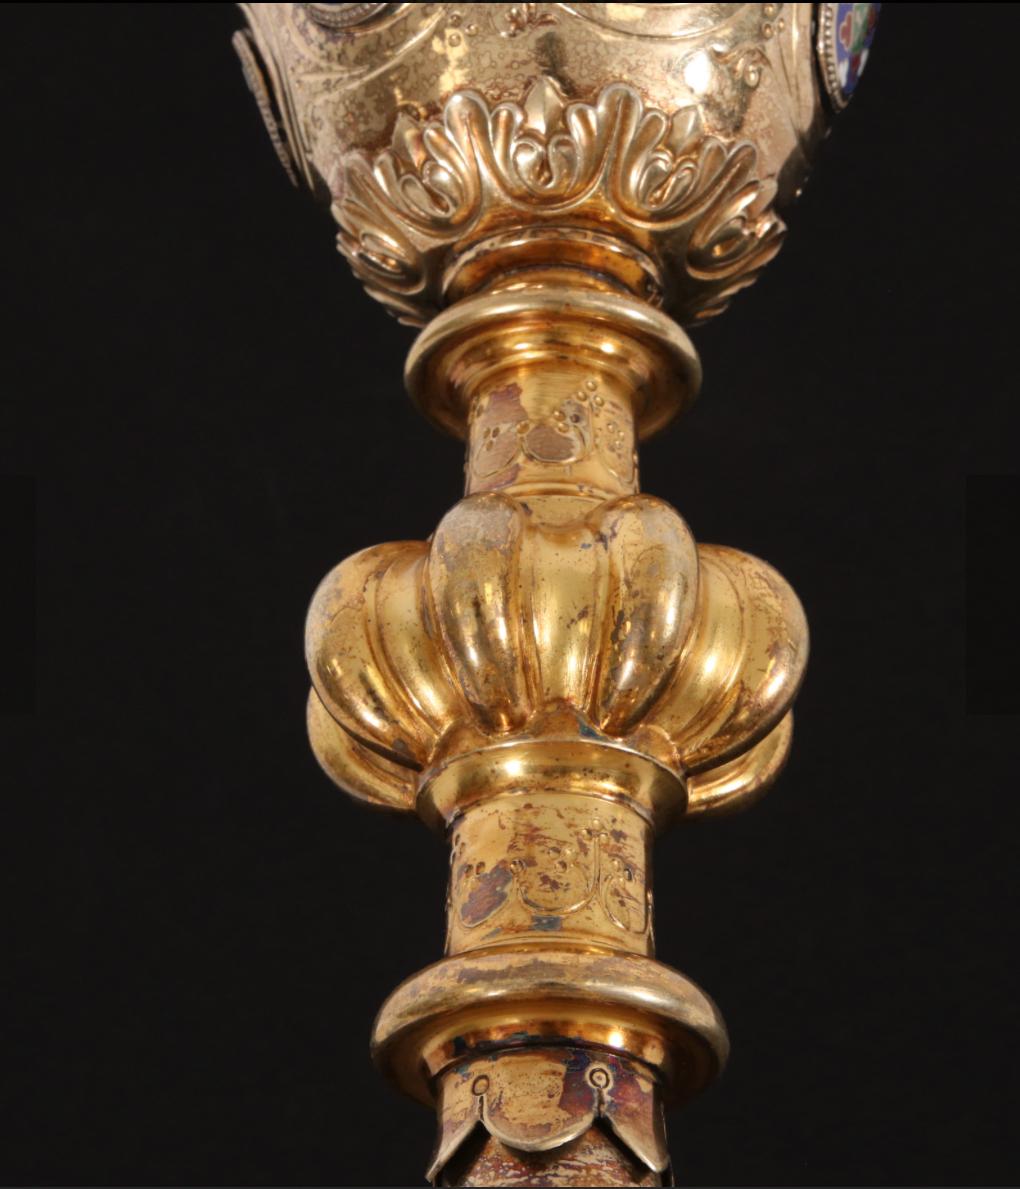 PLACIDE-BENOIT-MARIE POUSSIELGUE-RUSAND (Paris 1824-1889 Paris)

Chalice


Placide Poussielgue-Rusand (1824-1889), was a gold & silversmith in Paris. He is known mainly for his liturgical objects: chalices, ciborium, patens, monstrances and was also